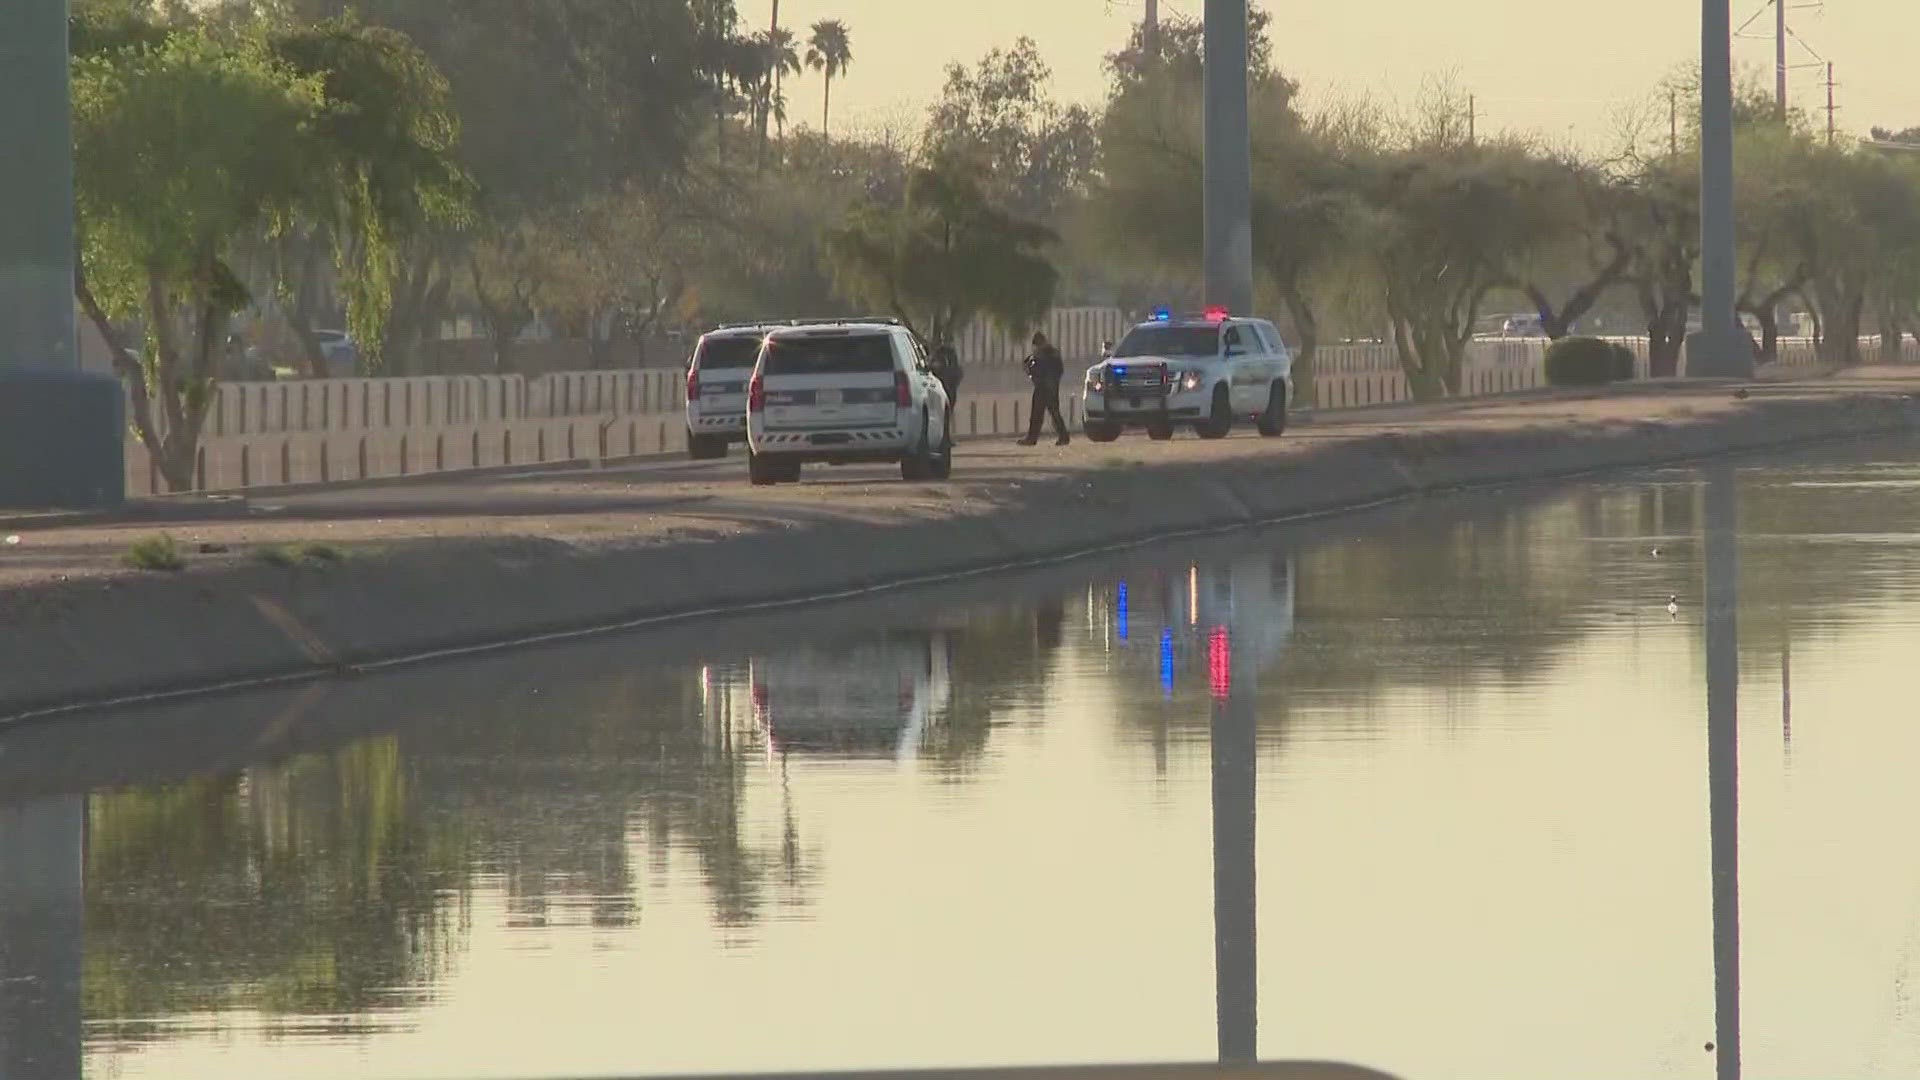 Police said that a person was found dead in a canal near 43rd and Peoria avenues.